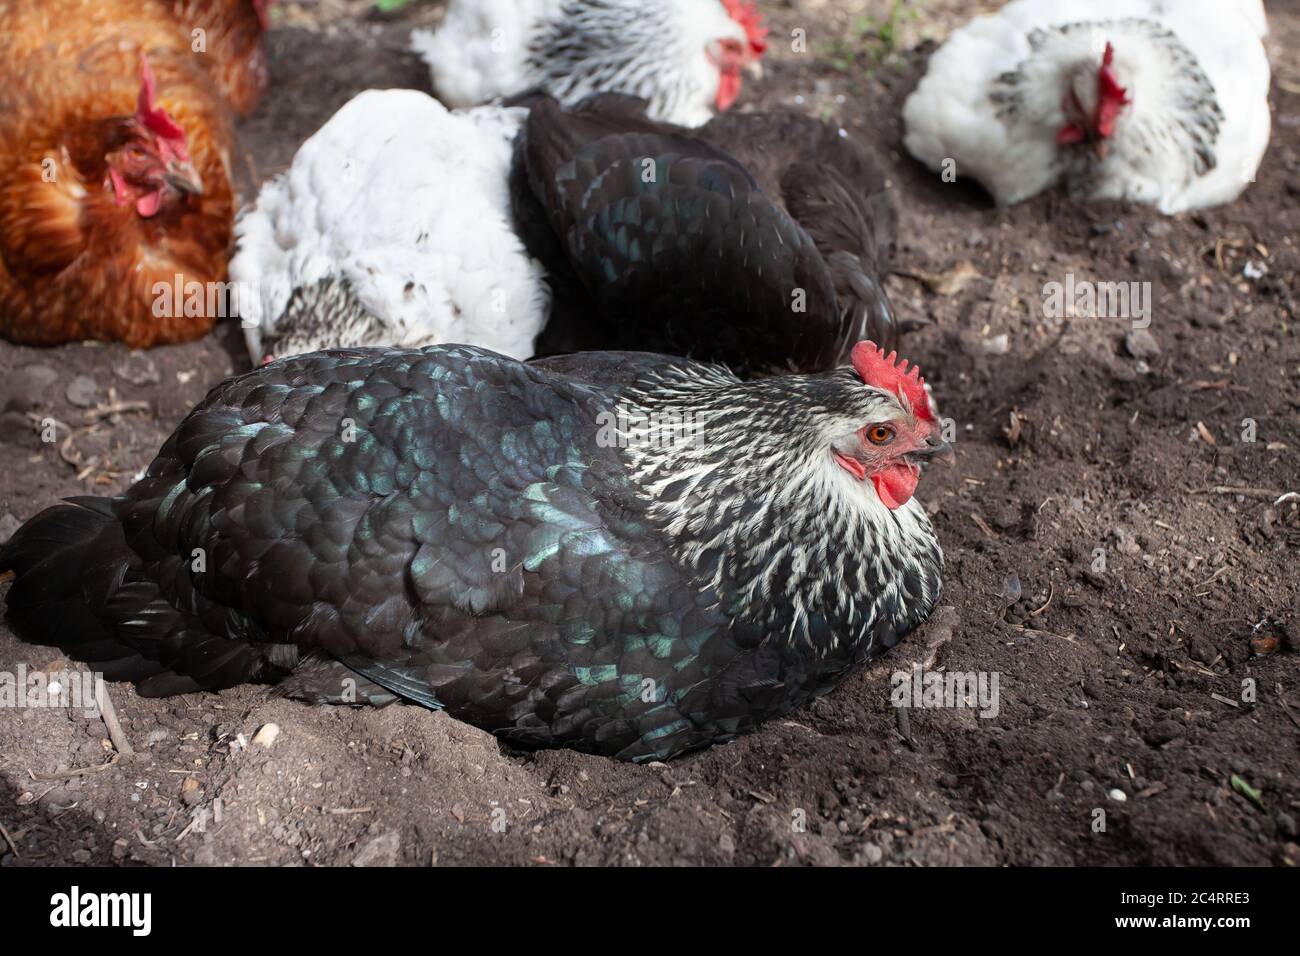 Mixed flock of chickens dust bathing in back garden. British Isles Stock Photo